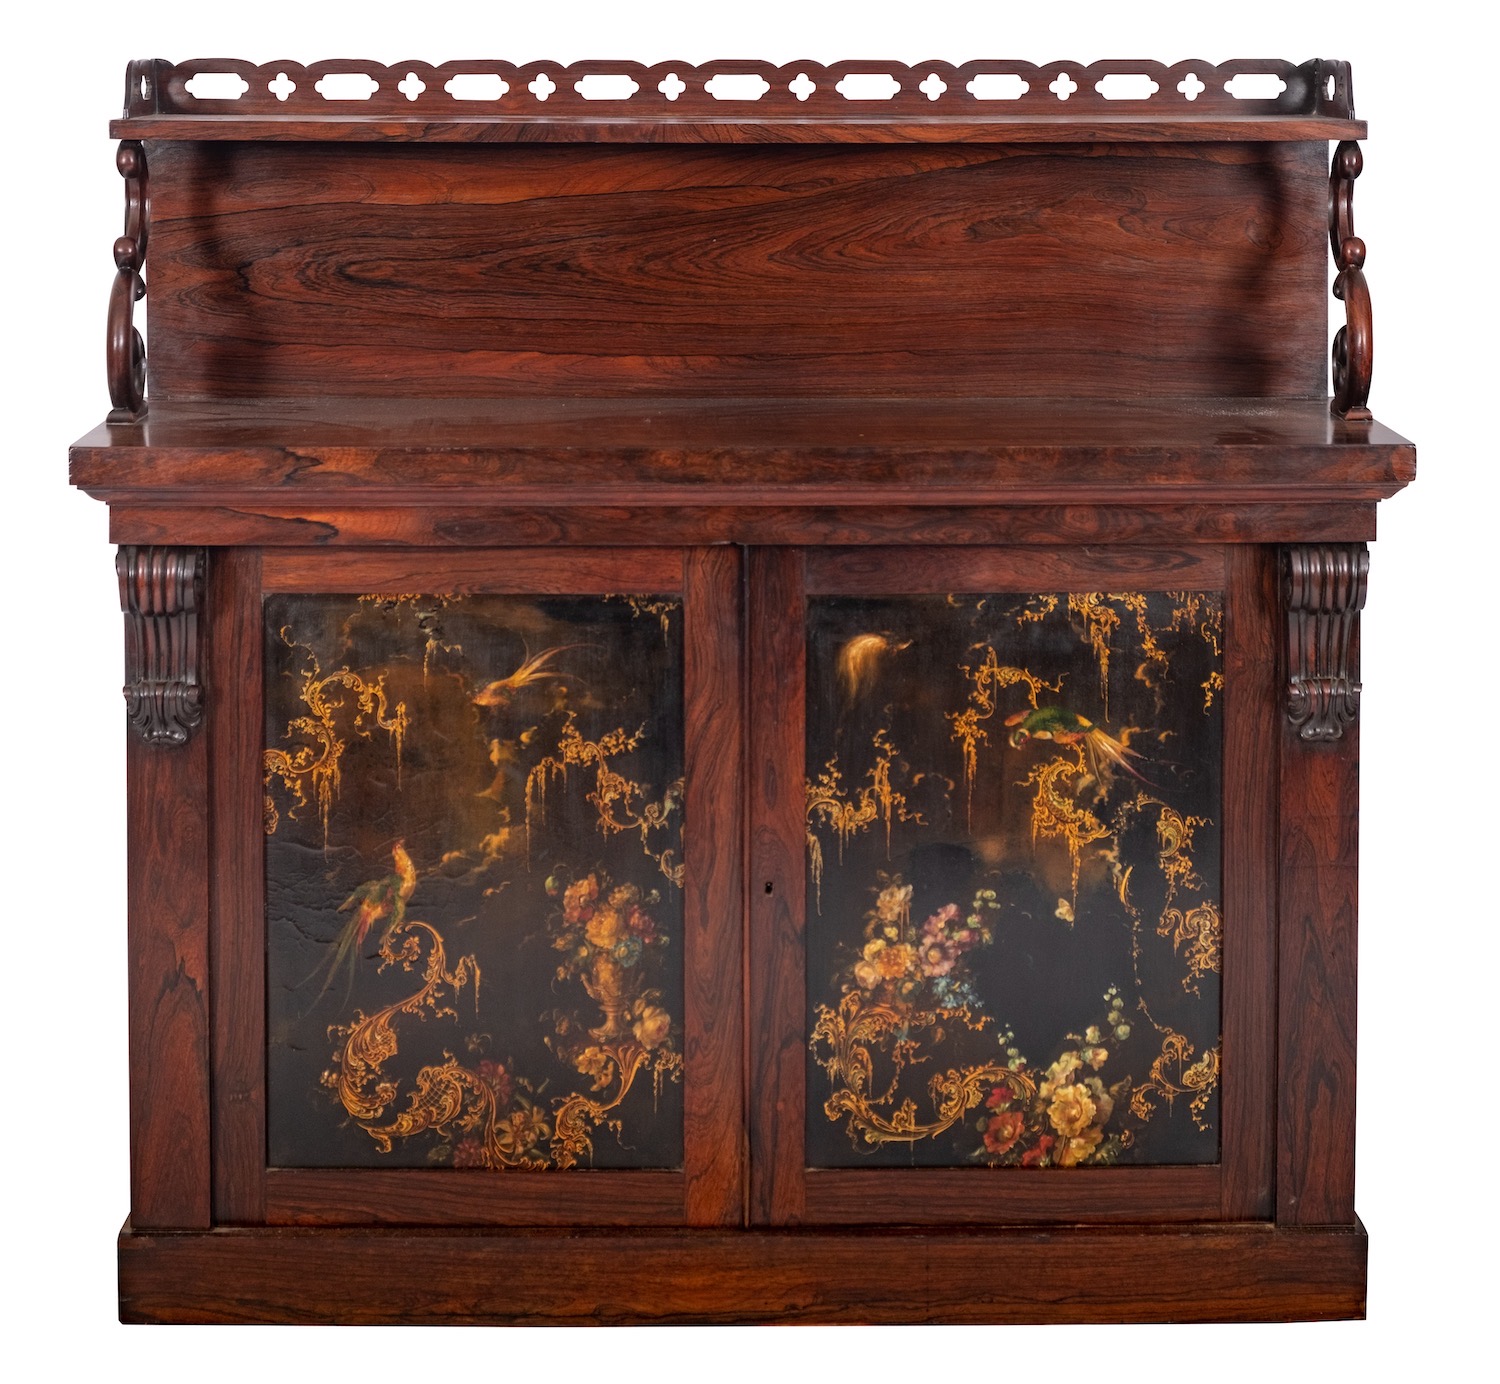 A fine William IV or early Victorian rosewood and parcel gilt papier mâché mounted side cabinet;